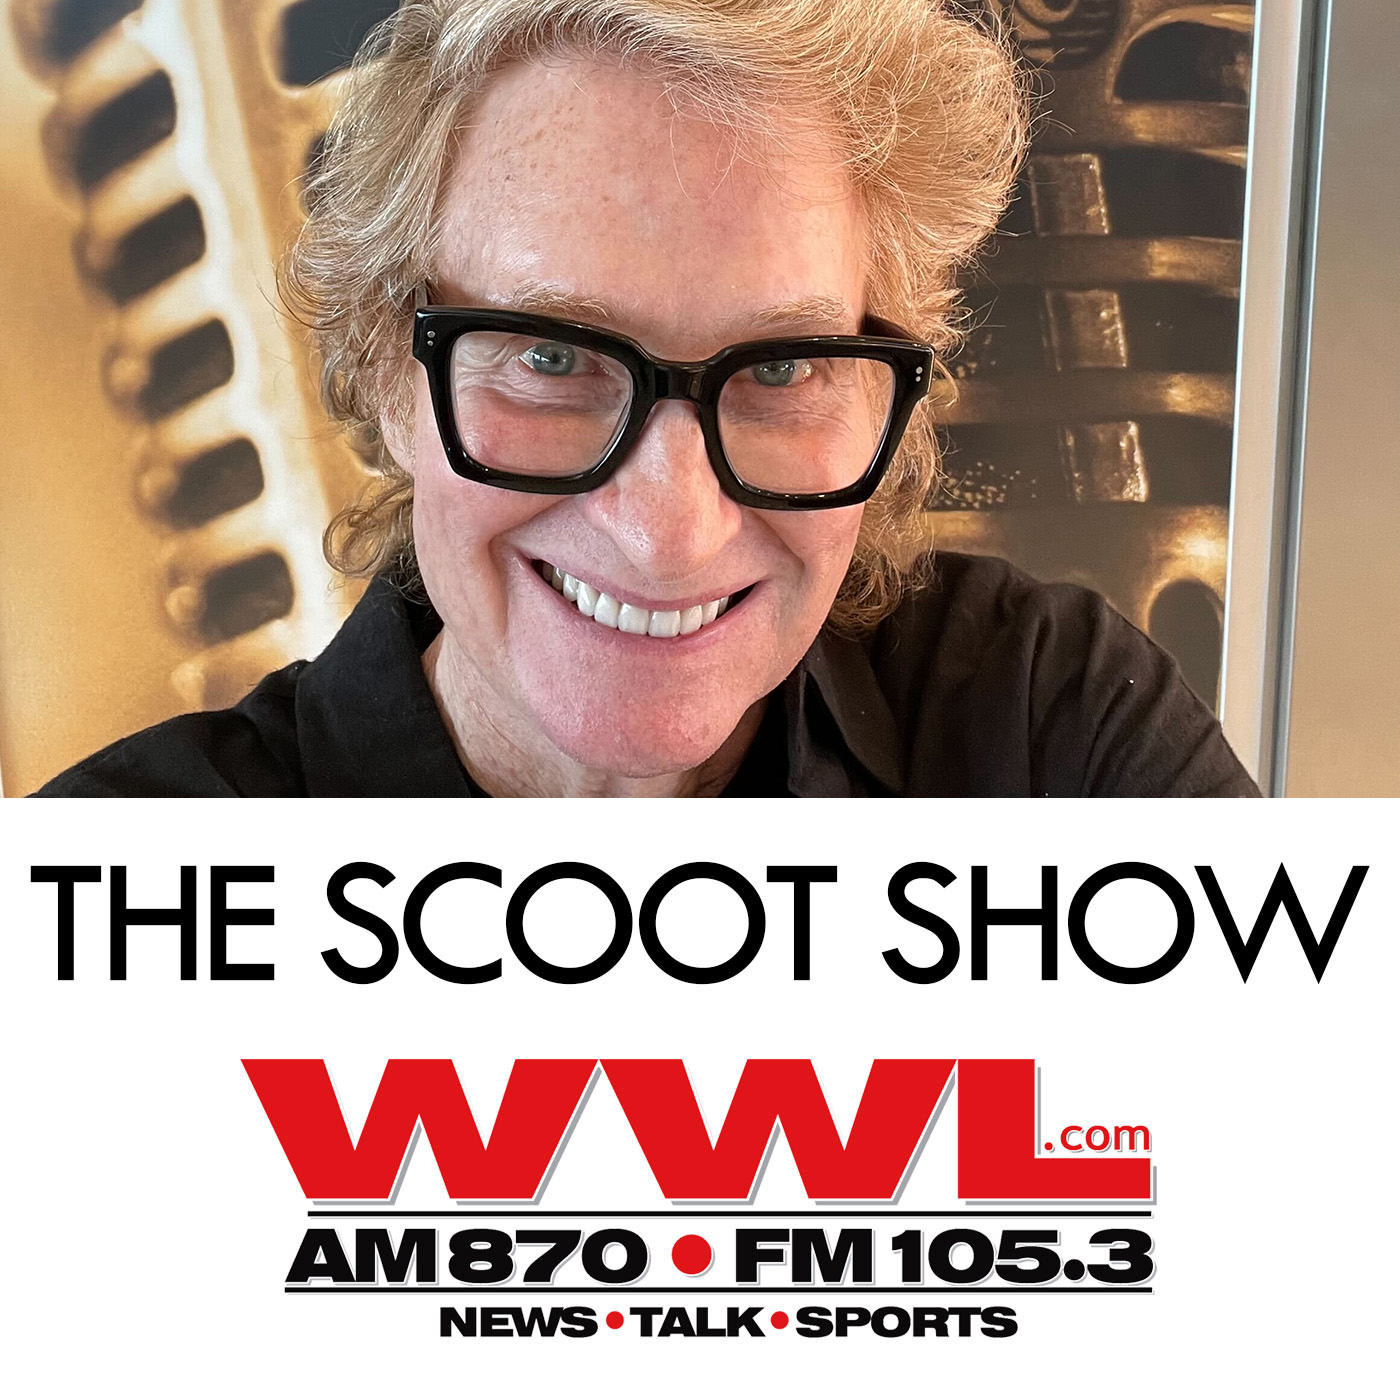 The Scoot Show with Scoot